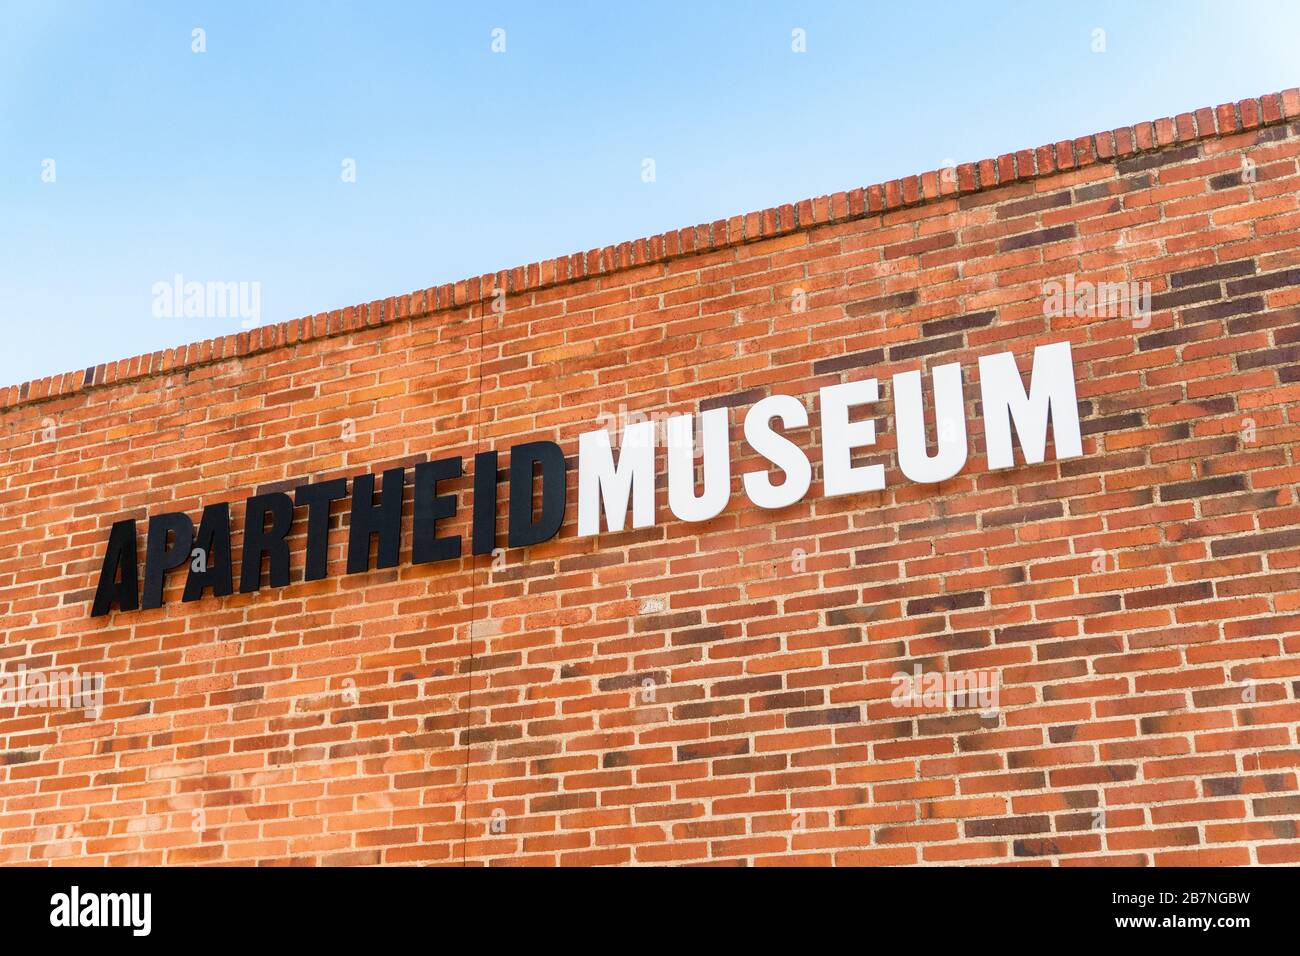 Johannesburg, South Africa - May 25, 2019: Apartheid museum sign Stock Photo